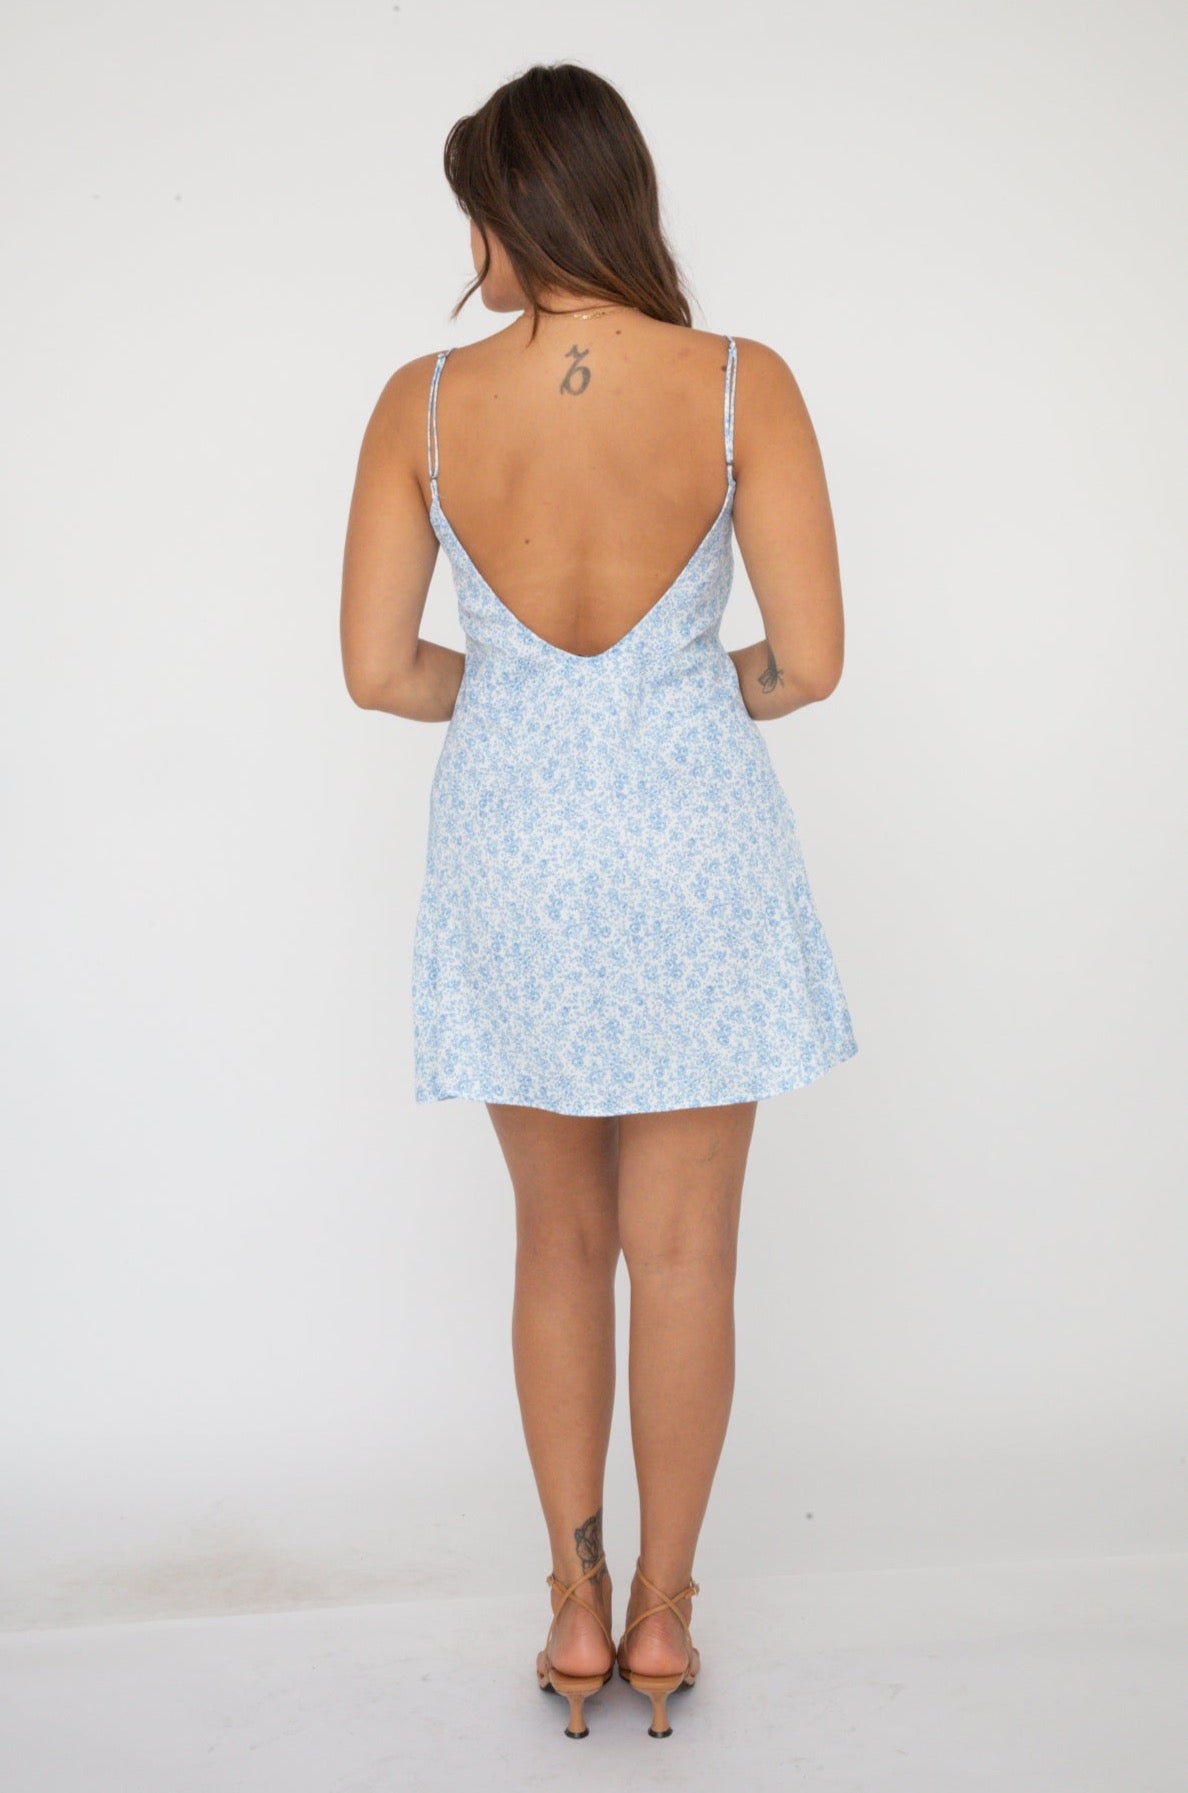 This is an image of Penny Mini - RESA featuring a model wearing the dress